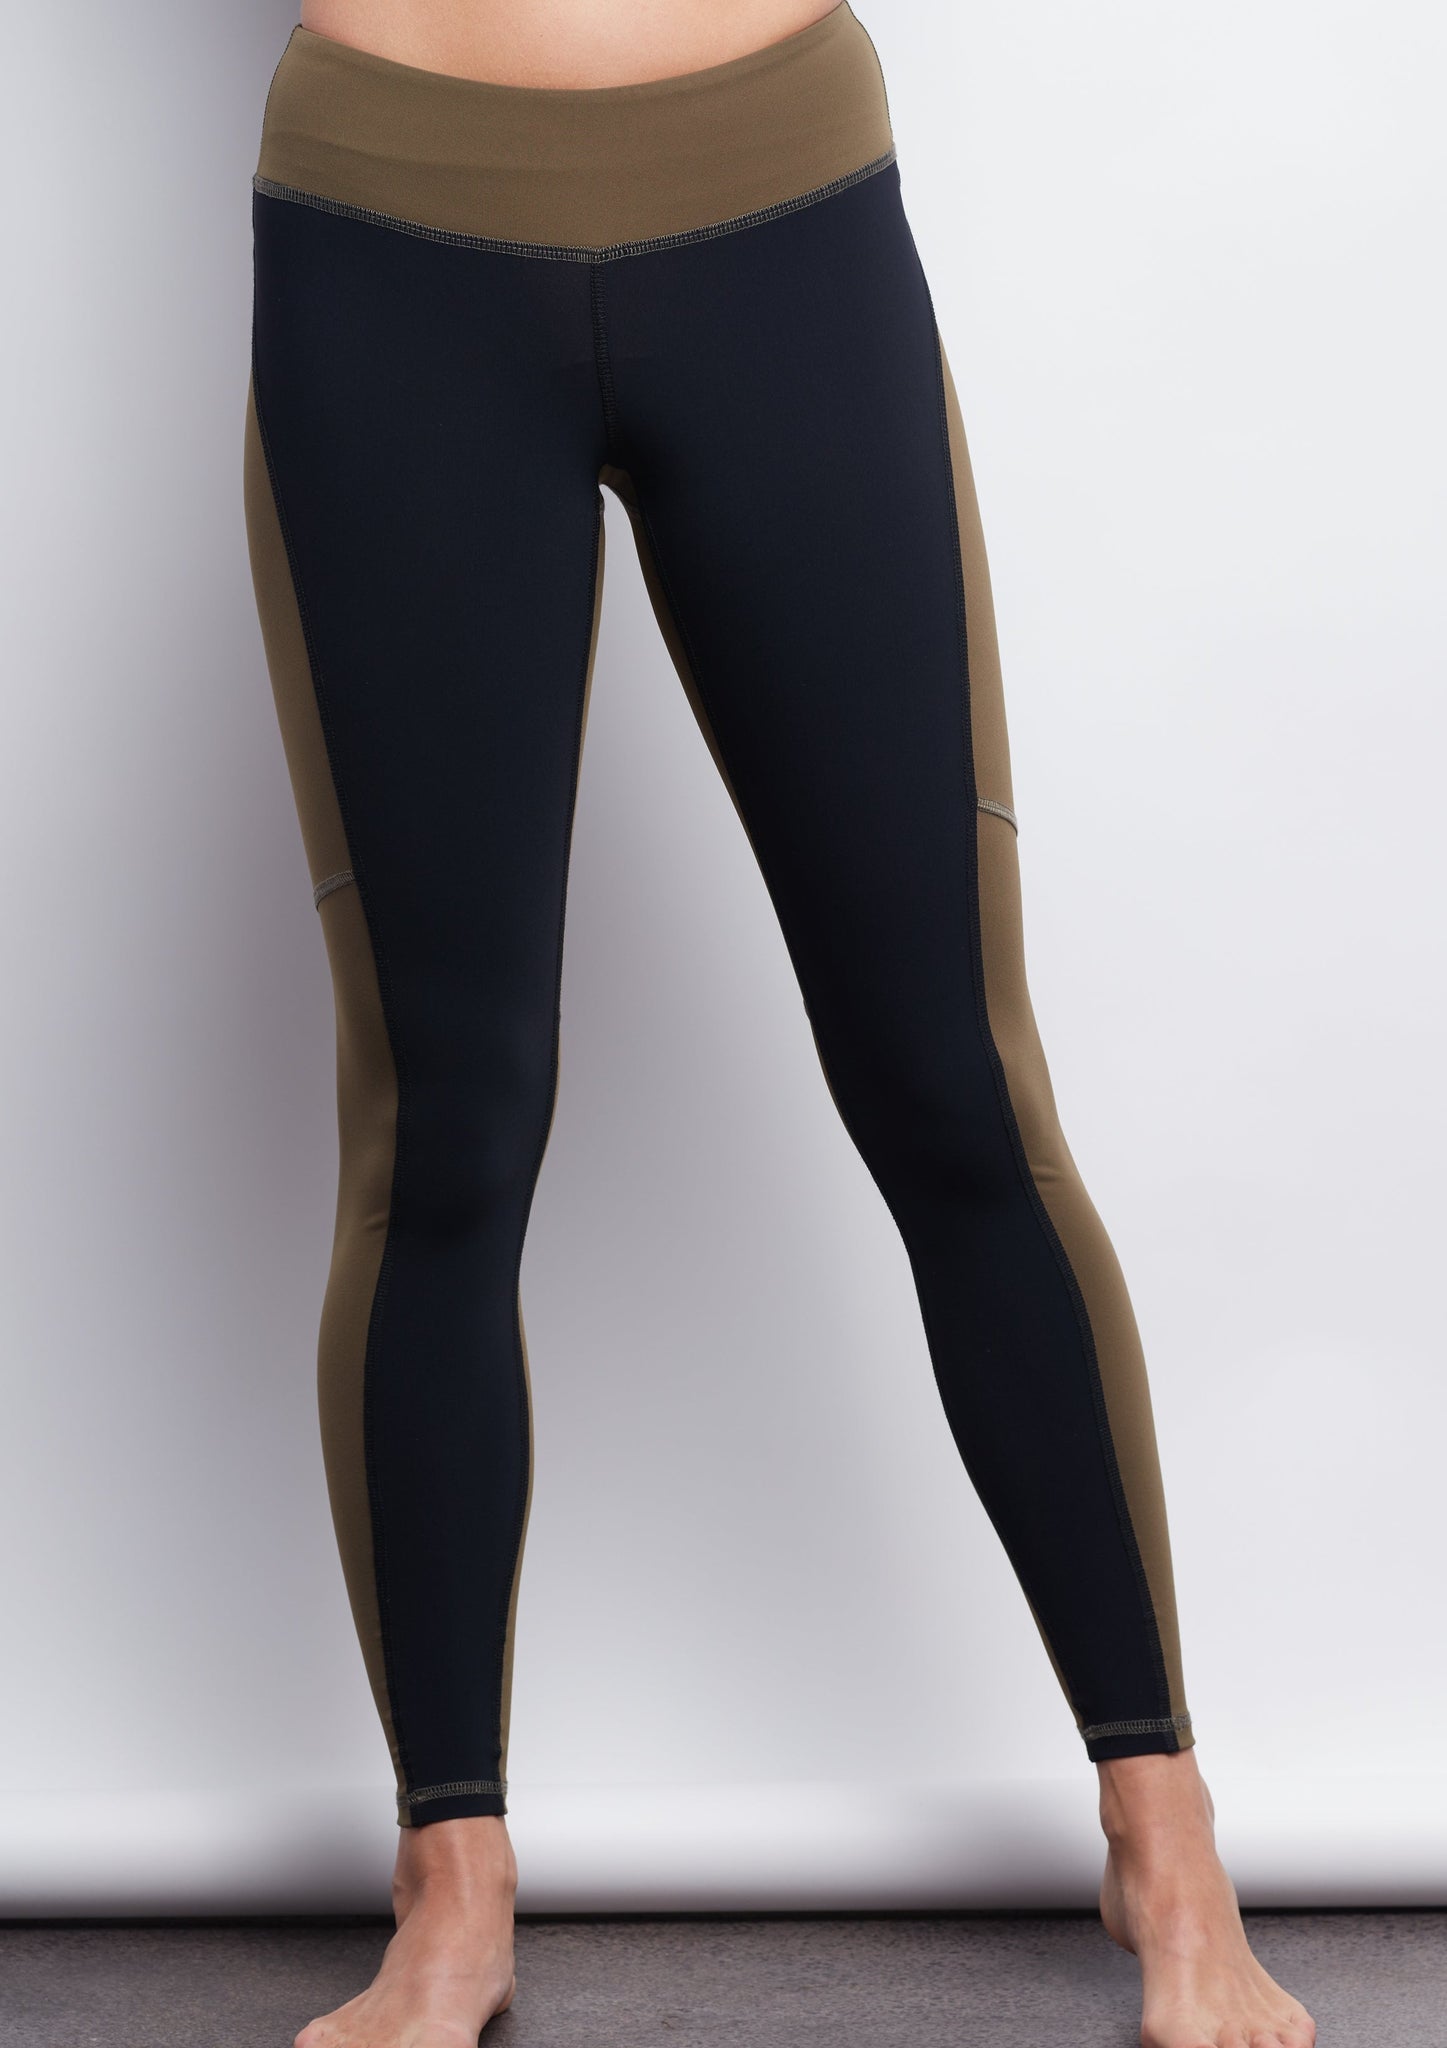 Army/Black Two-Tone Legging - Haven Collective